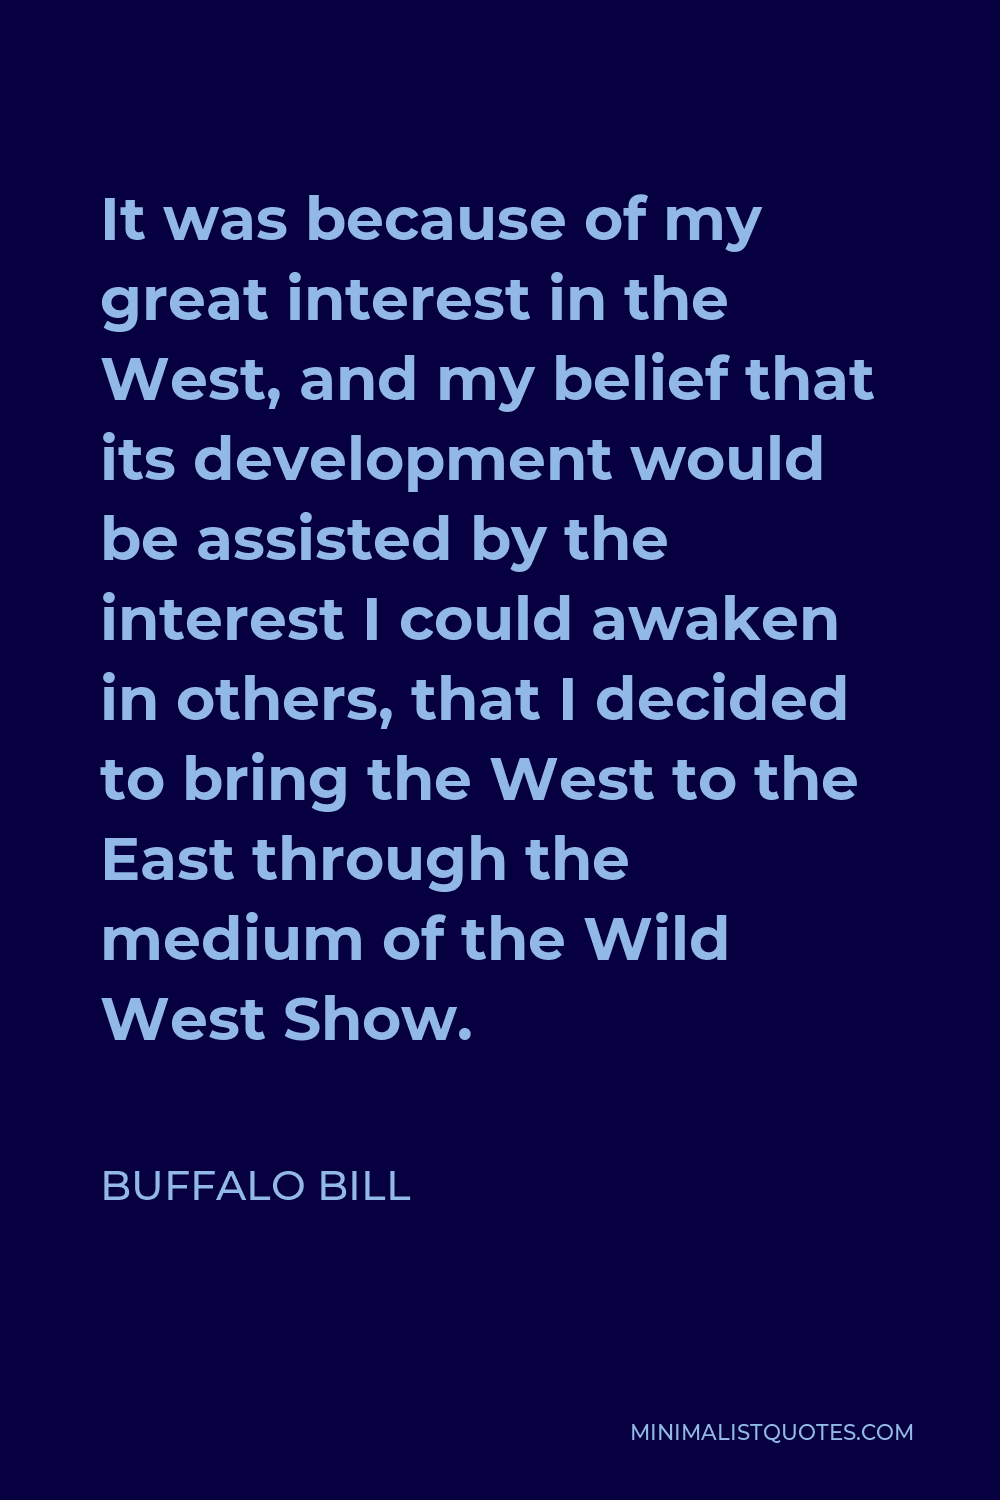 Buffalo Bill Quote - It was because of my great interest in the West, and my belief that its development would be assisted by the interest I could awaken in others, that I decided to bring the West to the East through the medium of the Wild West Show.